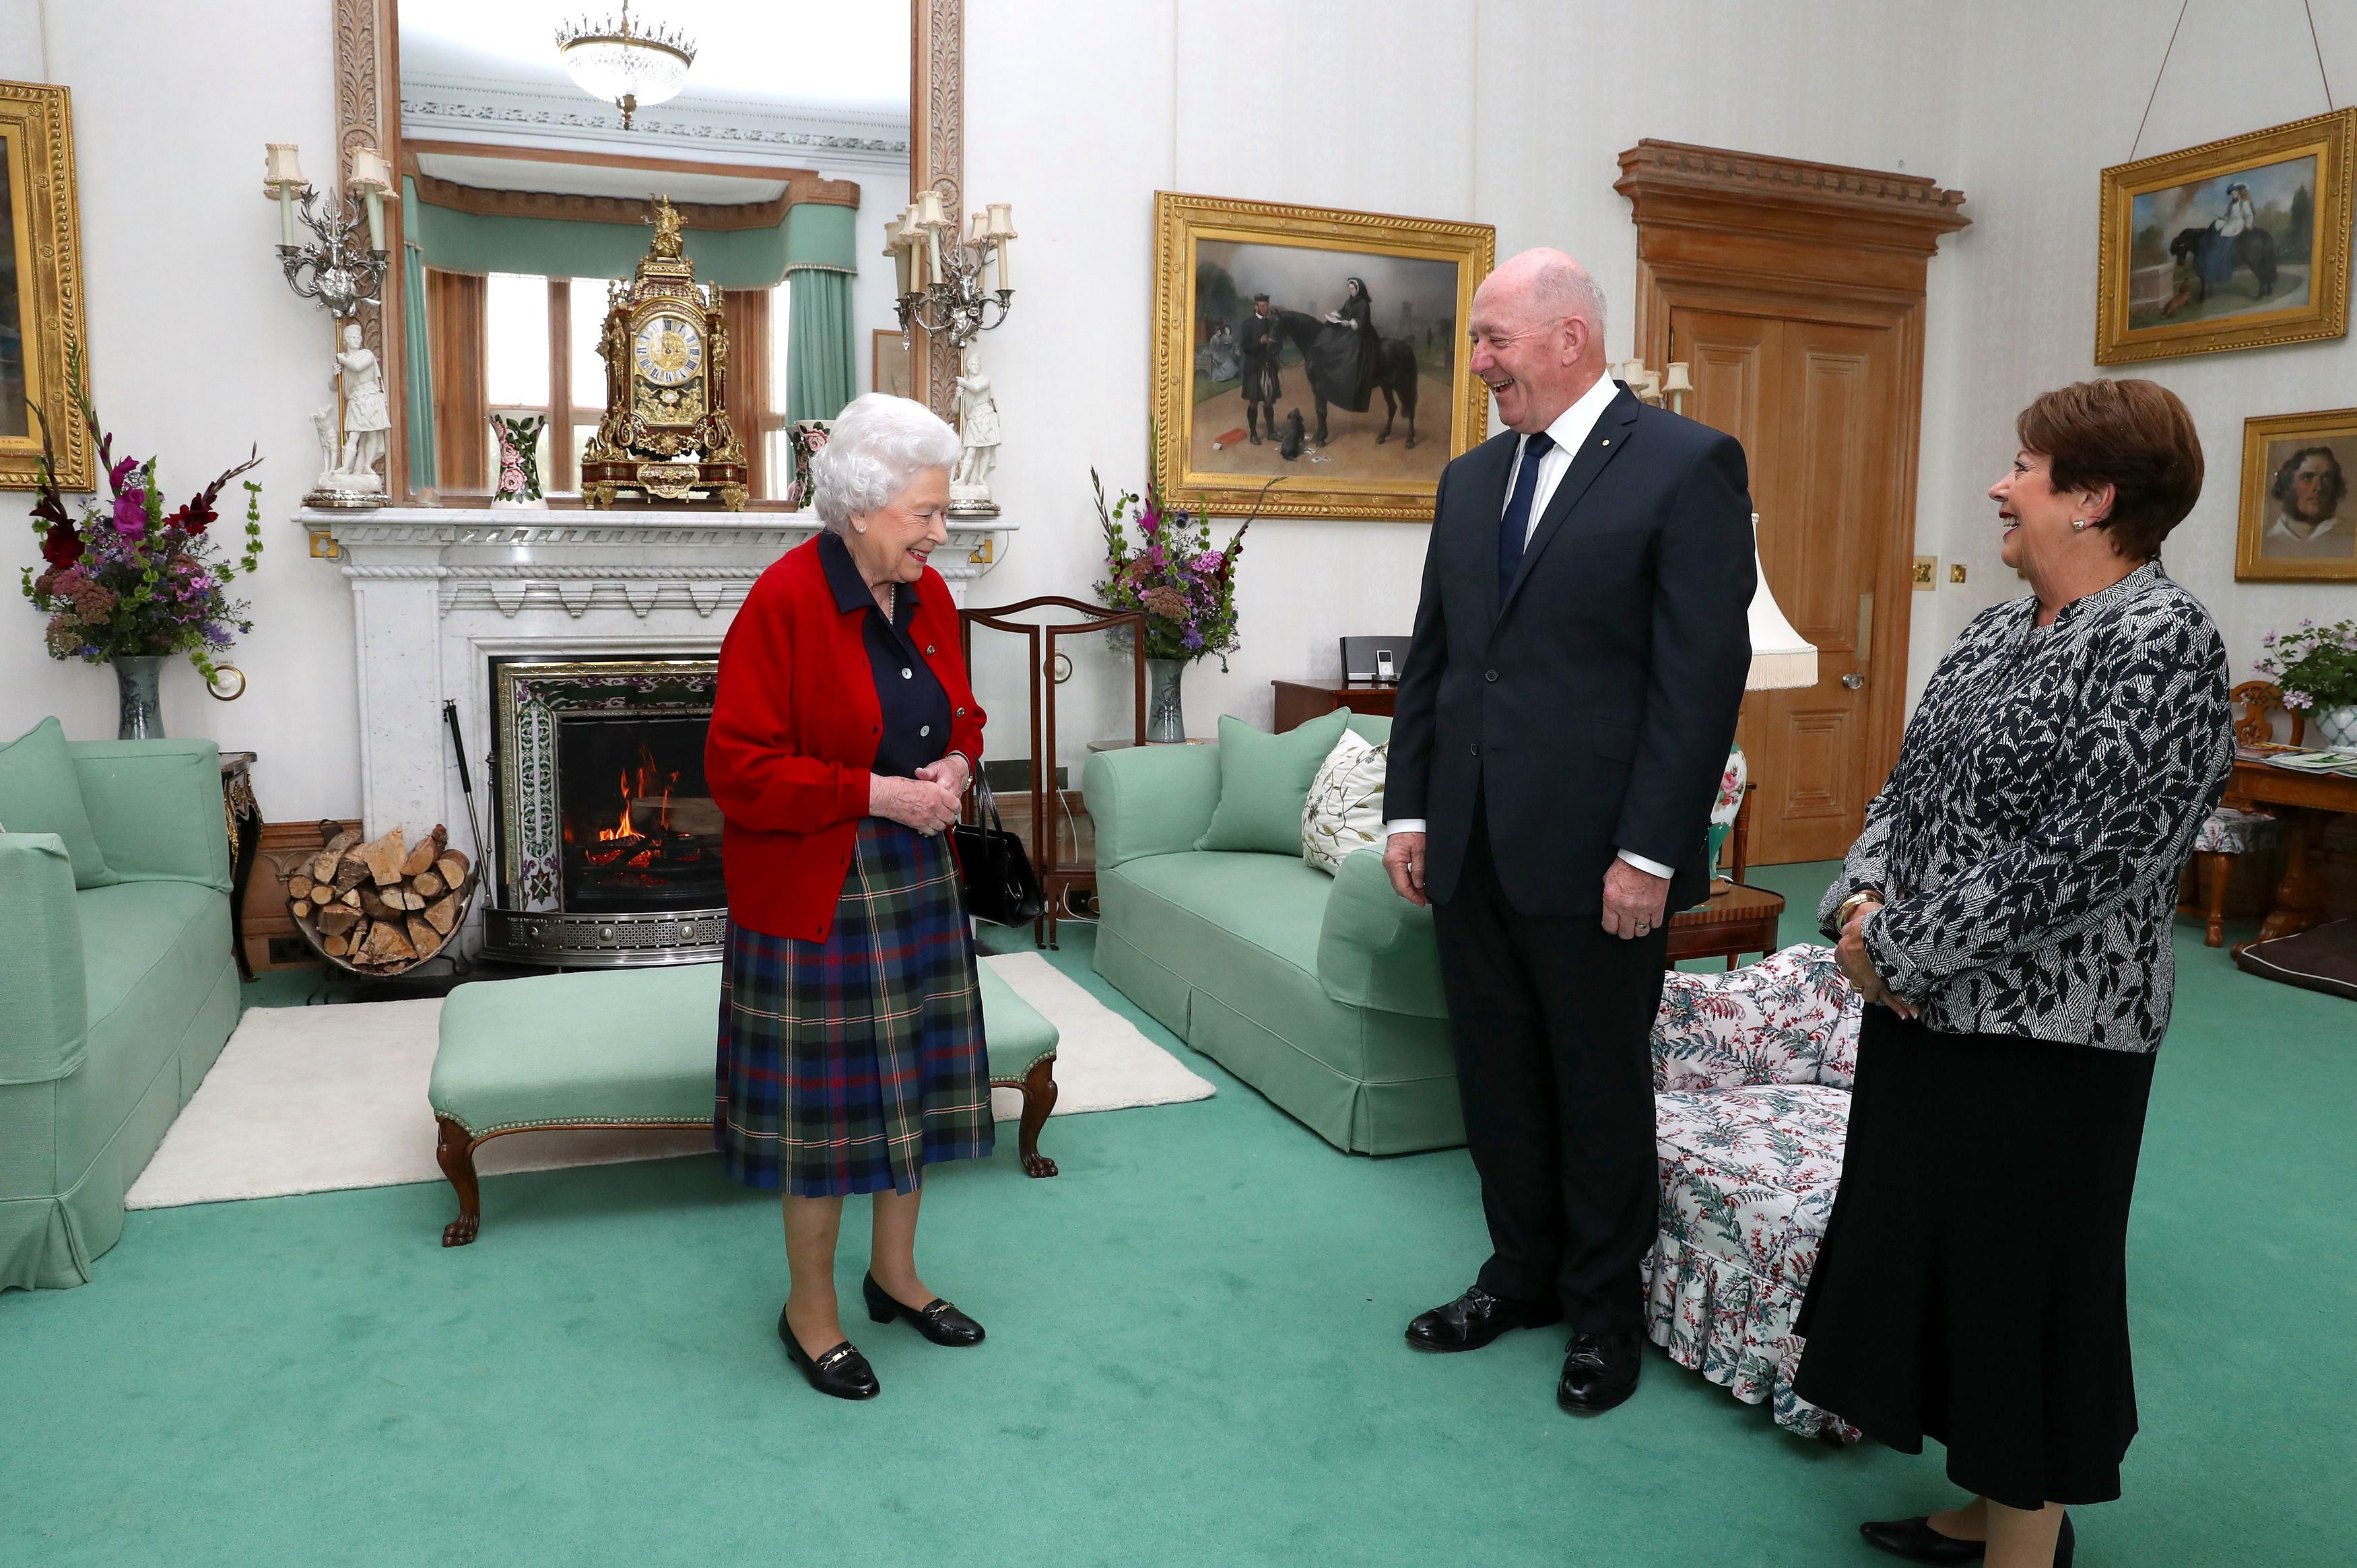 <p>Ever wonder what Balmoral Castle looks like on the inside? Royal watchers got a peek when Australian Governor-General Sir Peter Cosgrove and wife Lady Cosgrove met with Queen Elizabeth II during a private audience in the drawing room on Sept. 21, 2007.</p>